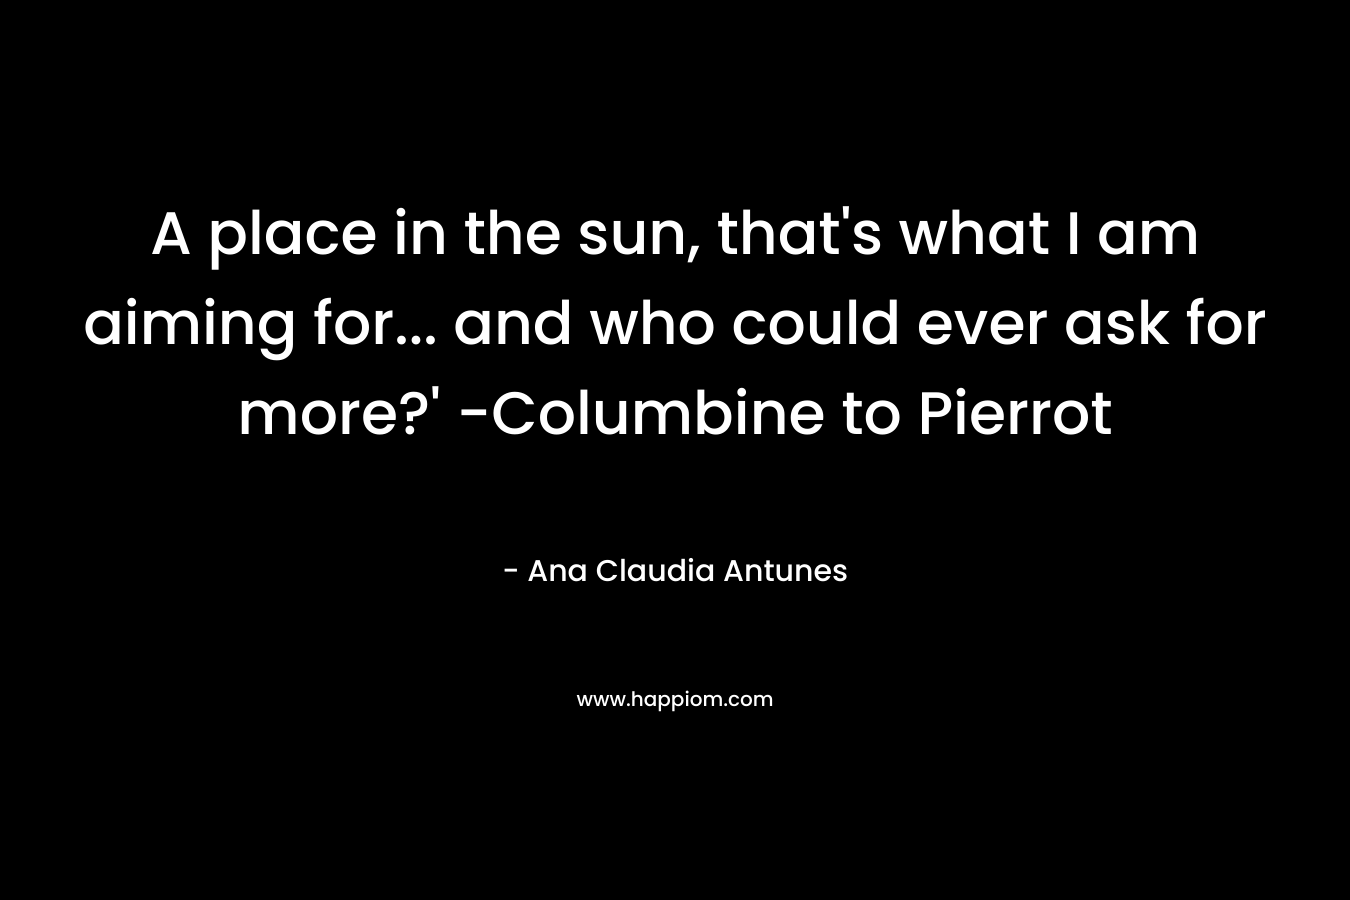 A place in the sun, that's what I am aiming for... and who could ever ask for more?' -Columbine to Pierrot